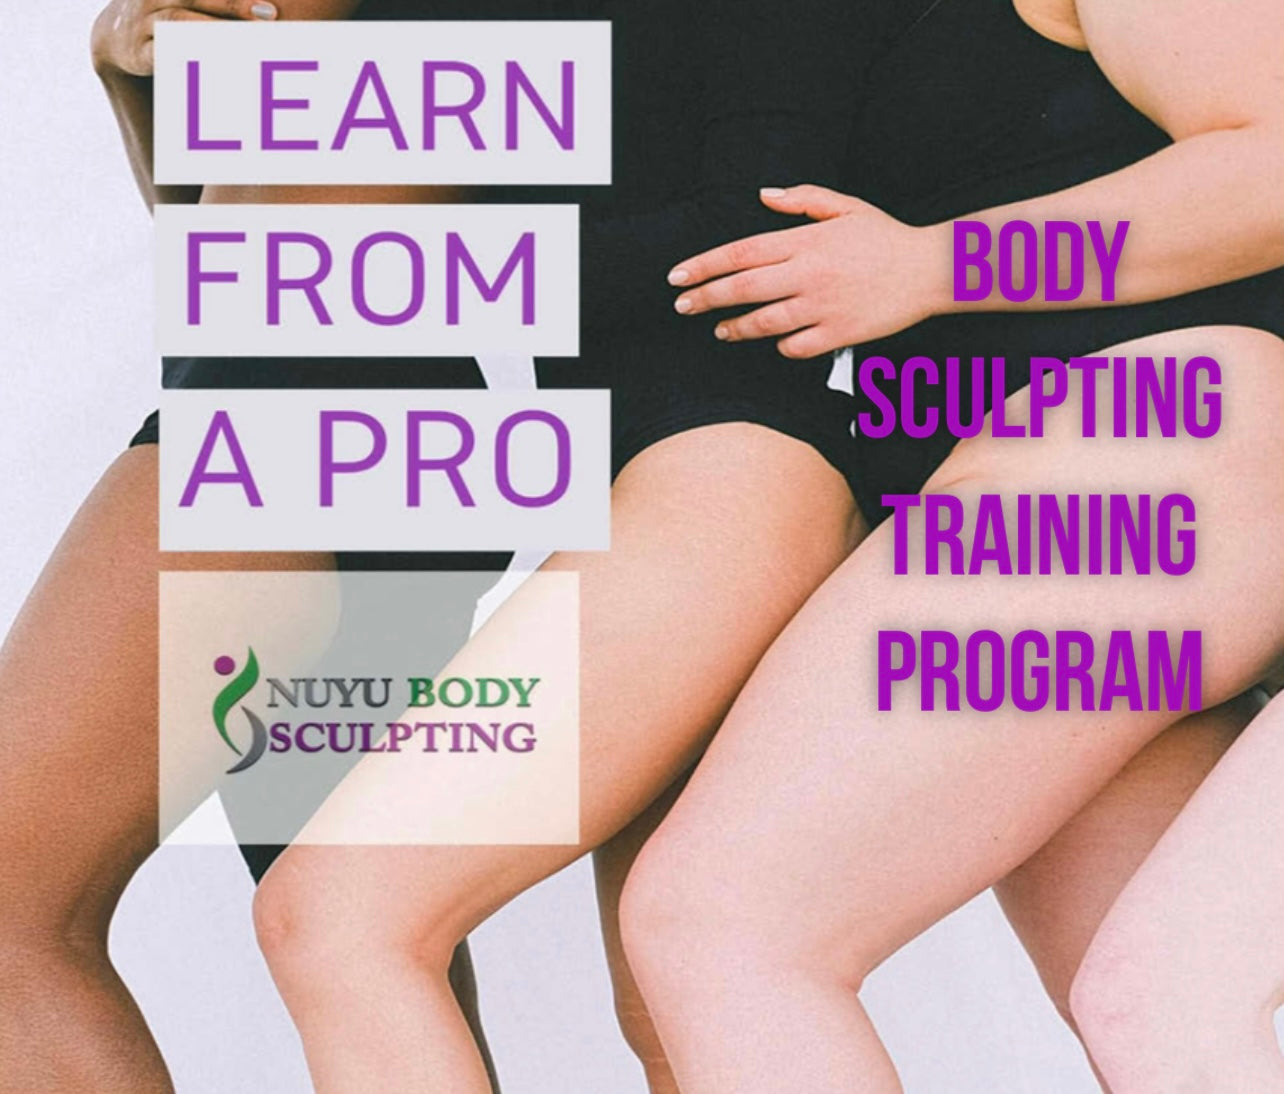 non surgical body contouring  learn body sculpting pdf  learn body sculpting online  learn body sculpting near me  learn body contouring online classes  learn body contouring online  get certified in body sculpting  get certified in body contouring  body sculpting vendor list  body sculpting training pdf  body sculpting training near me  body sculpting training course near me  body sculpting training course  body sculpting certificationonline  body sculpting courses online  